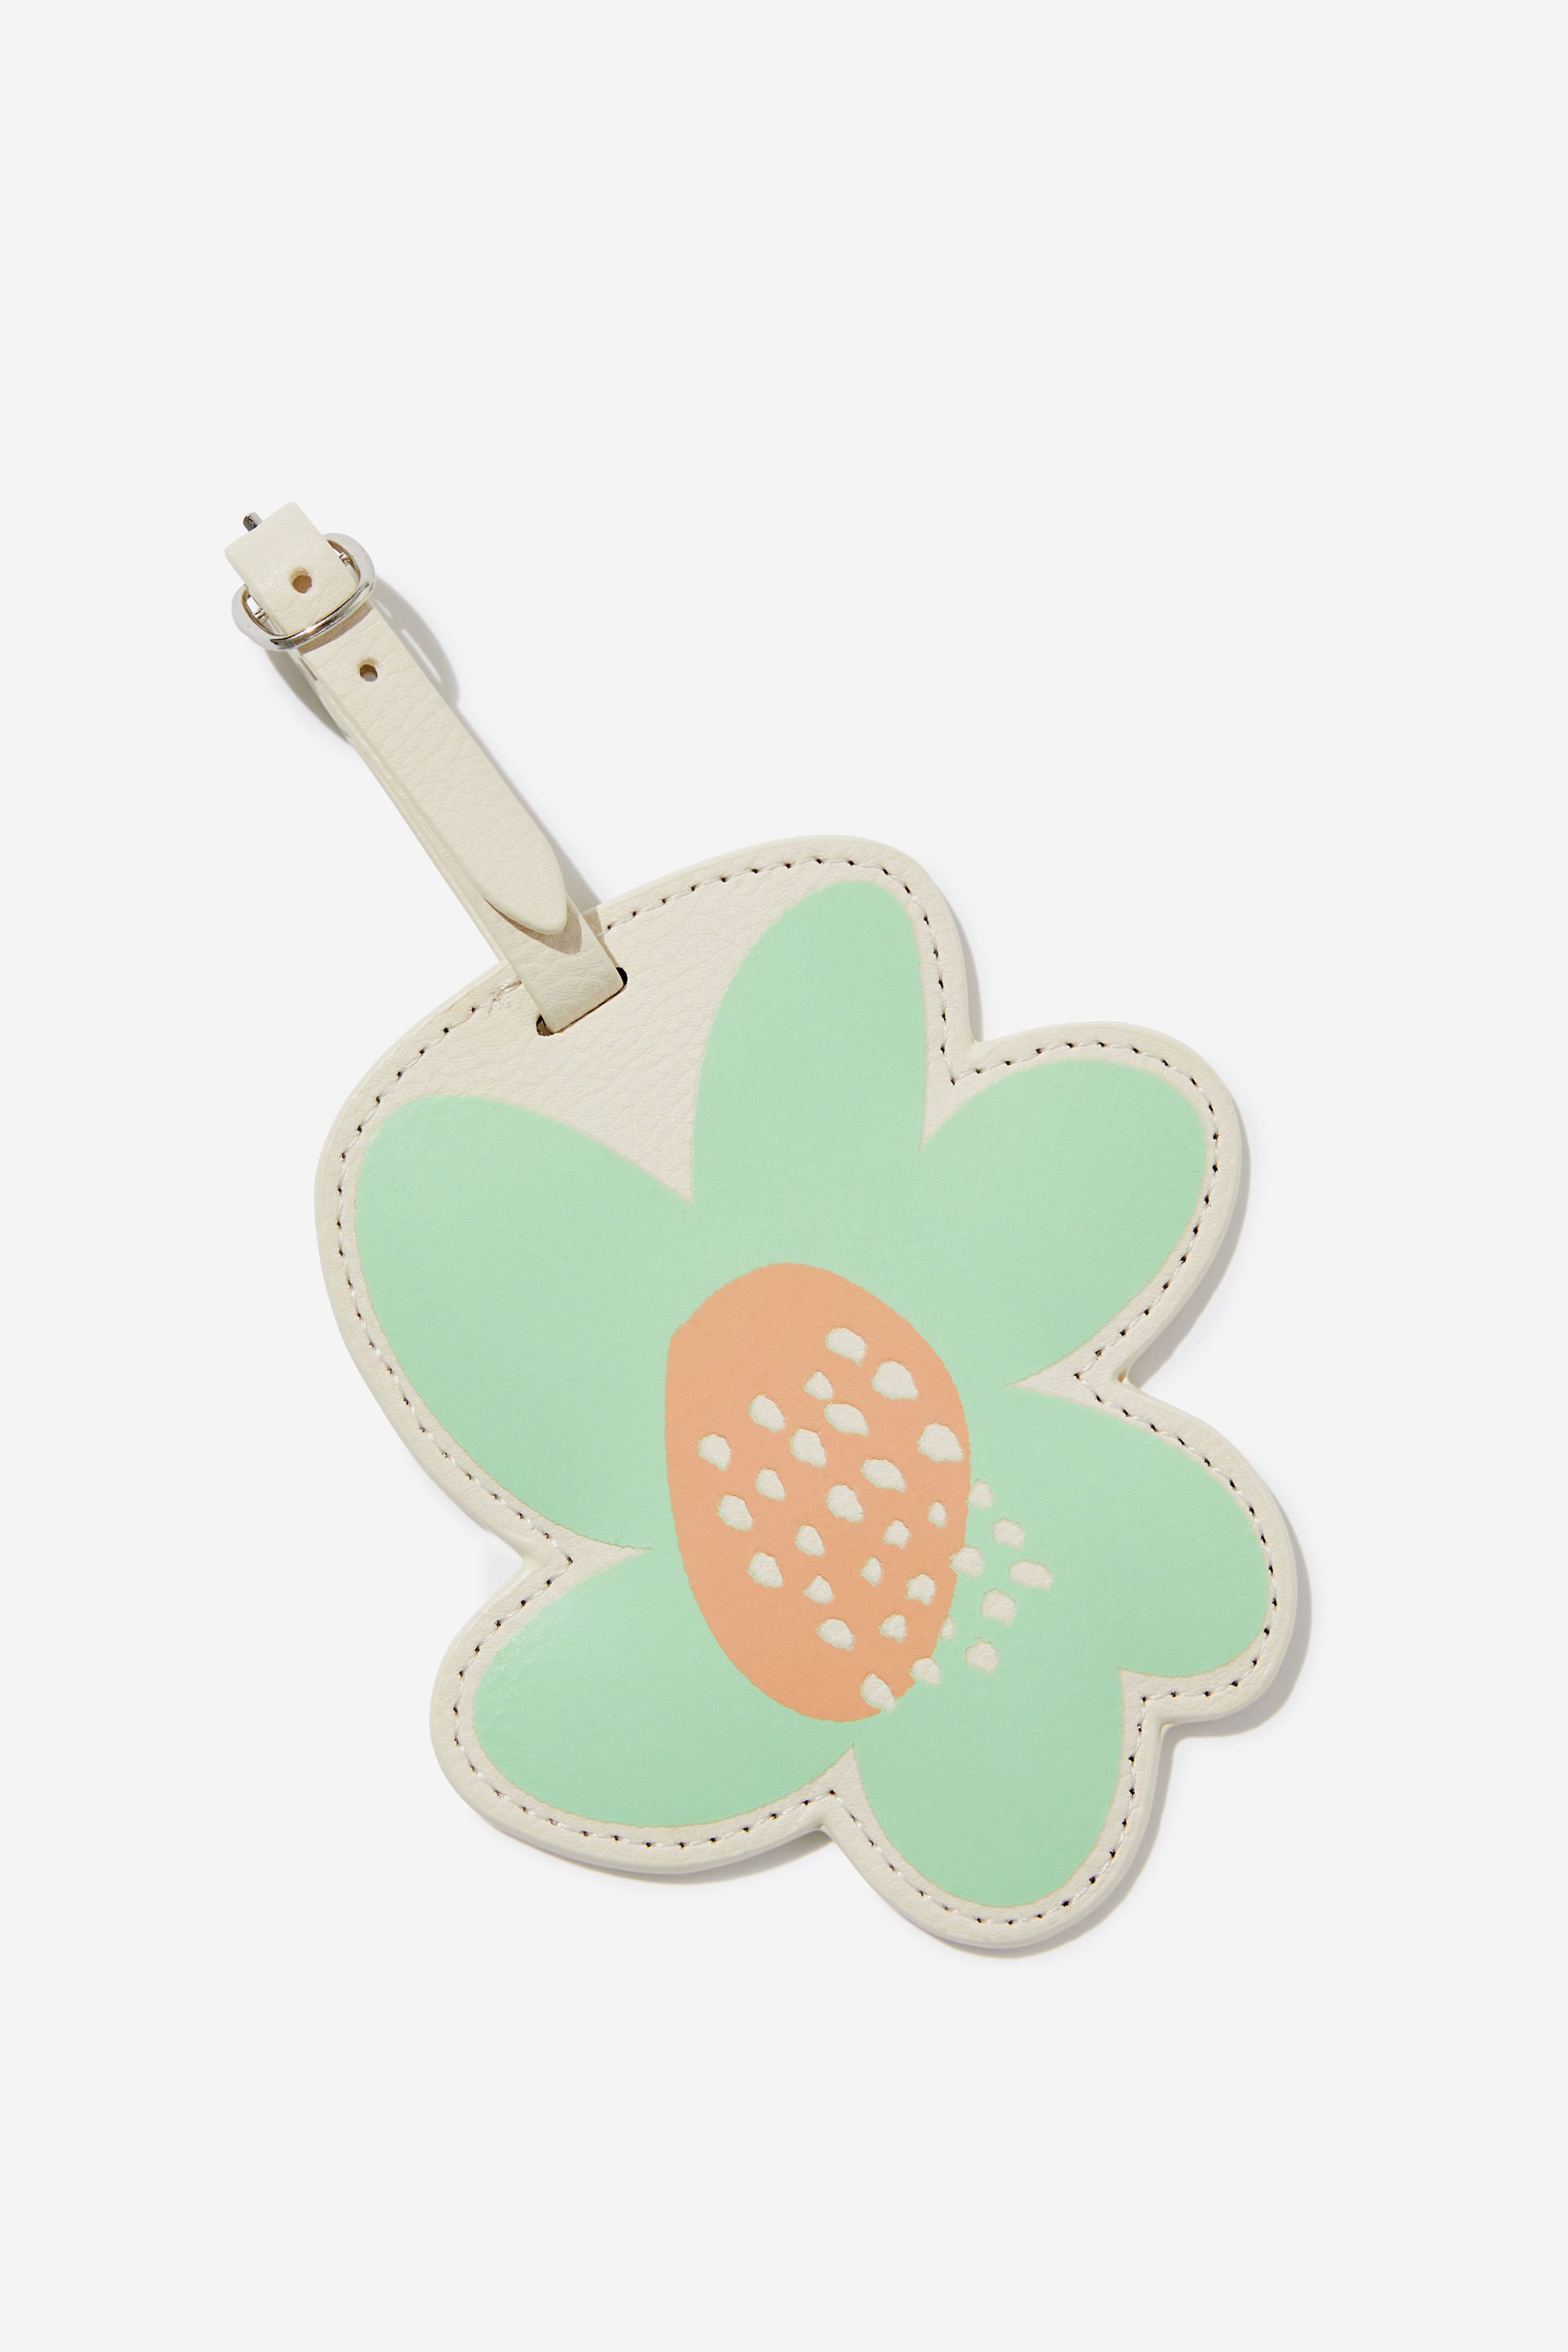 Typo - Off The Grid Luggage Tag - Abstract flower